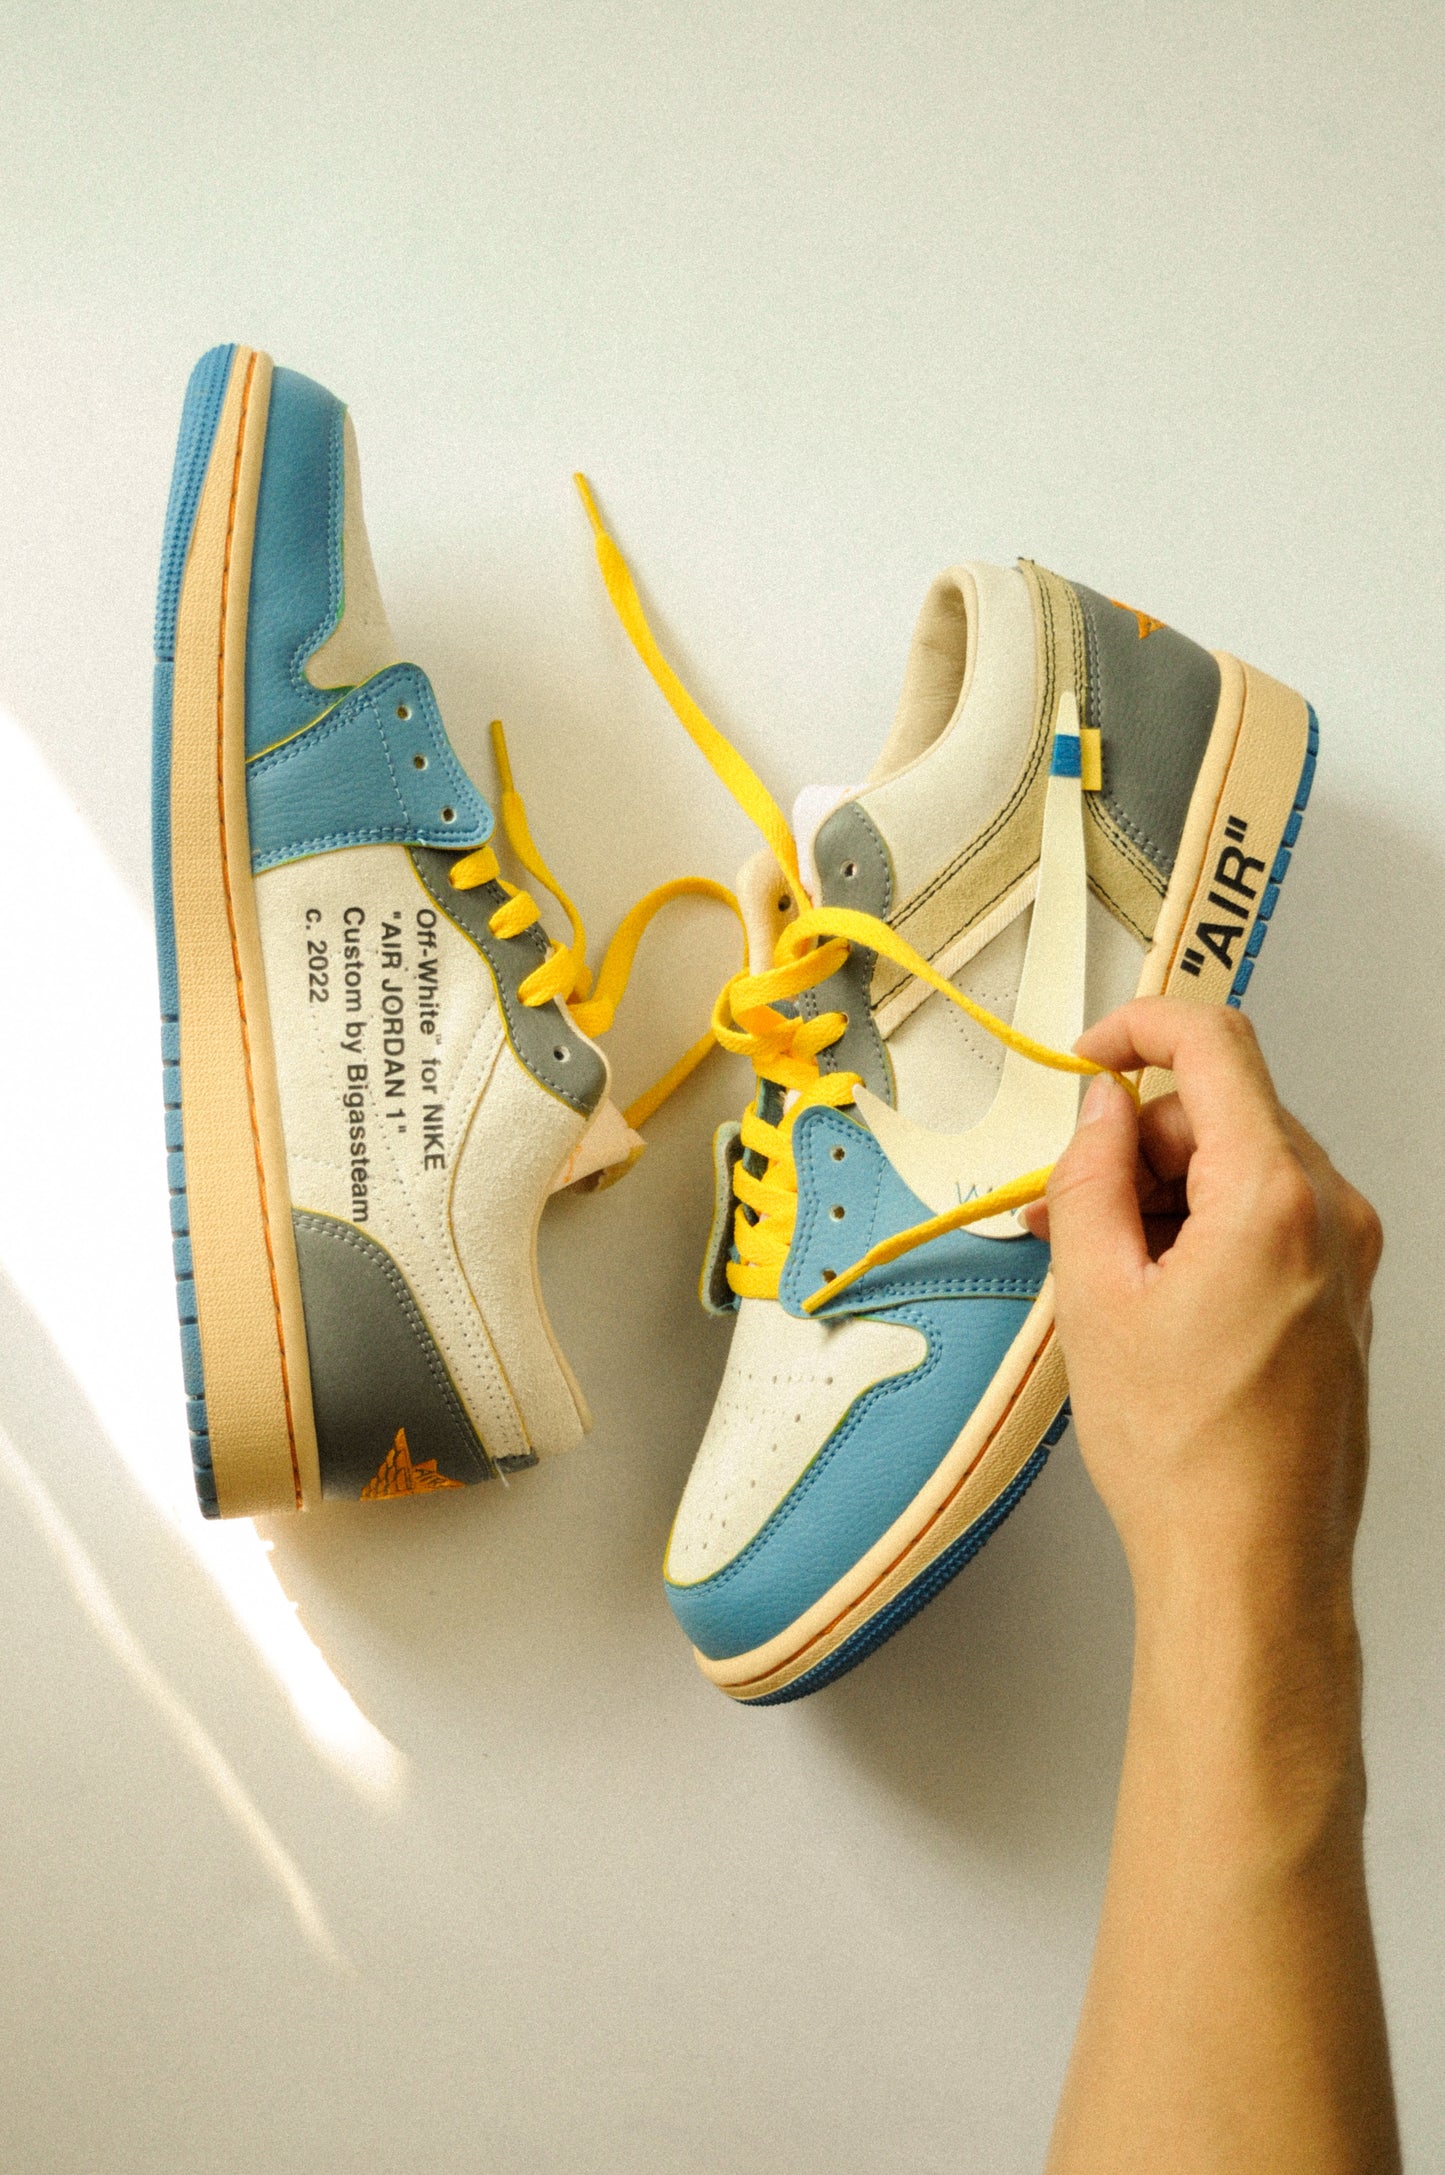 Have the Off White Canary Yellow Jordan 1s Been Released Yet? : r/Sneakers